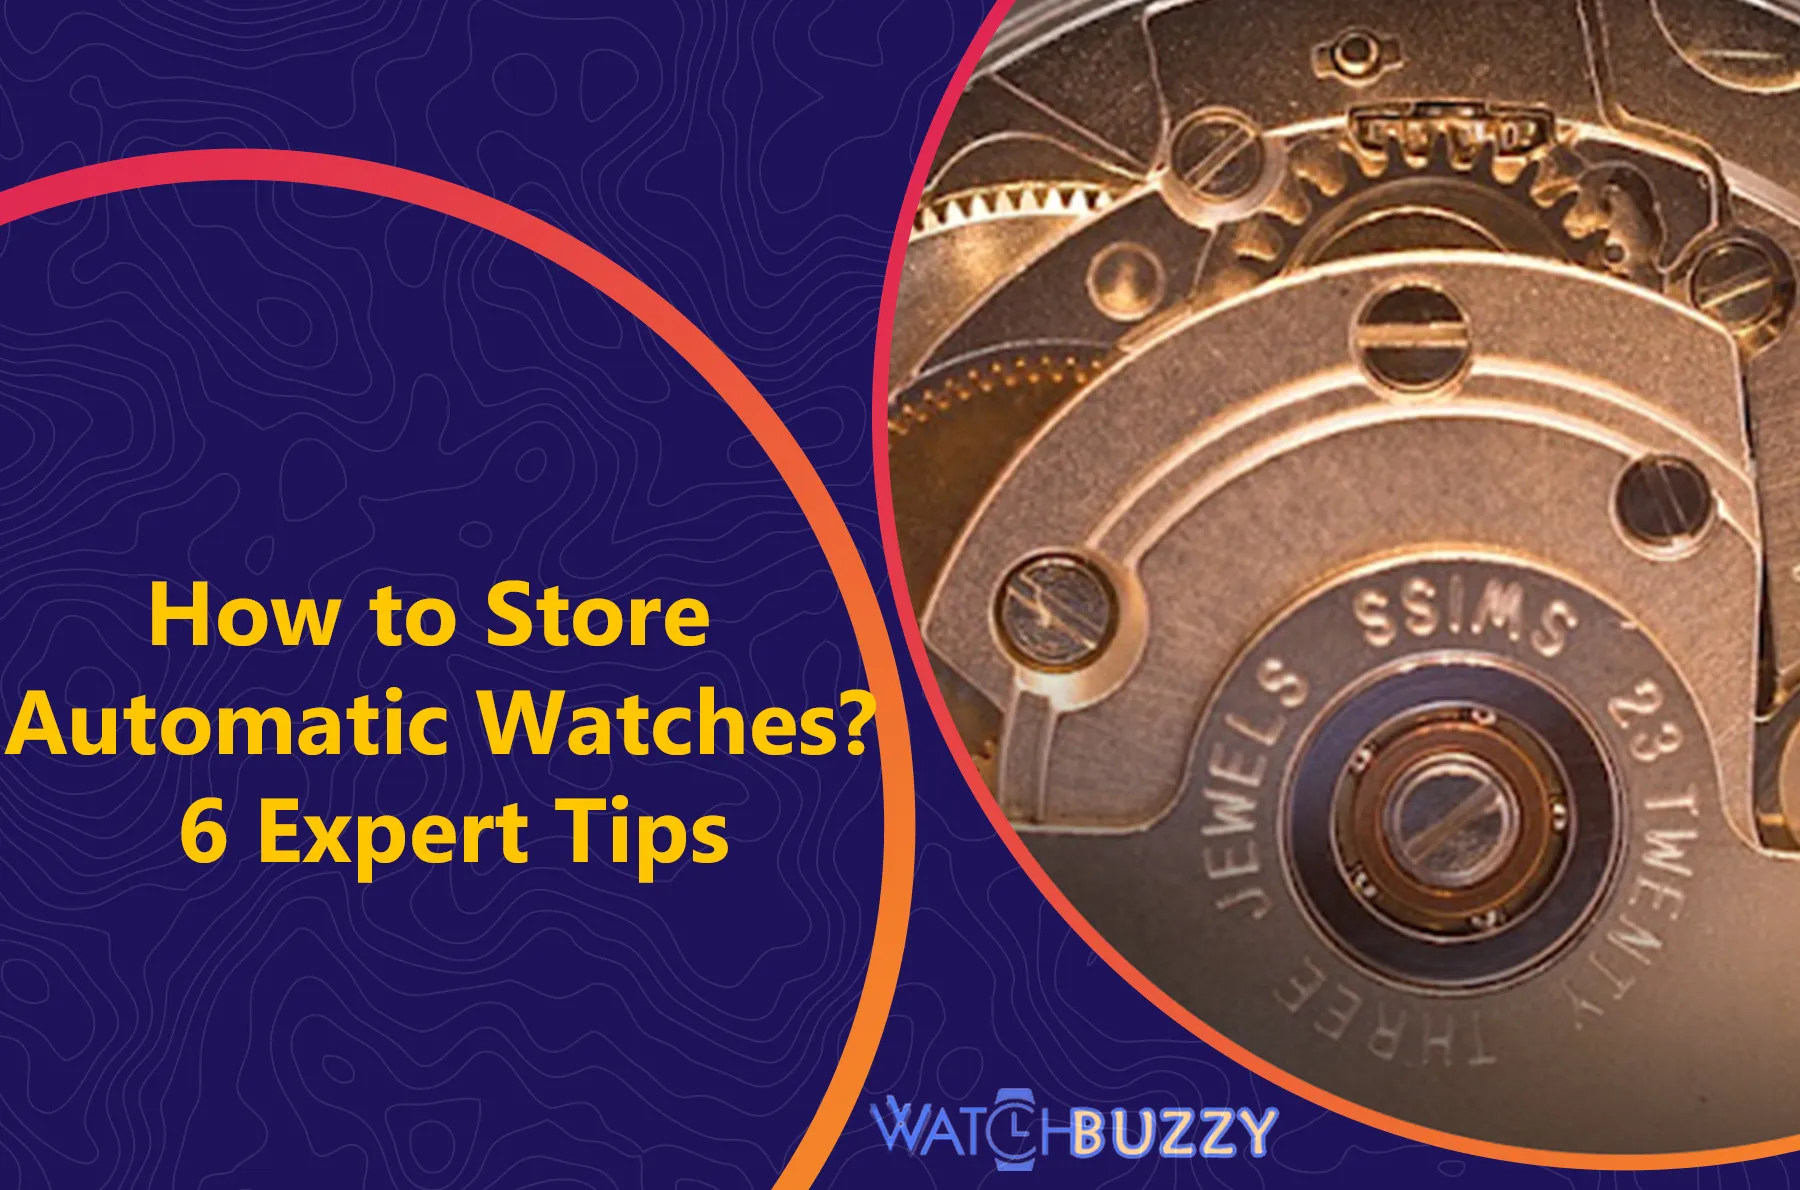 How to Store Automatic Watches? 6 Expert Tips